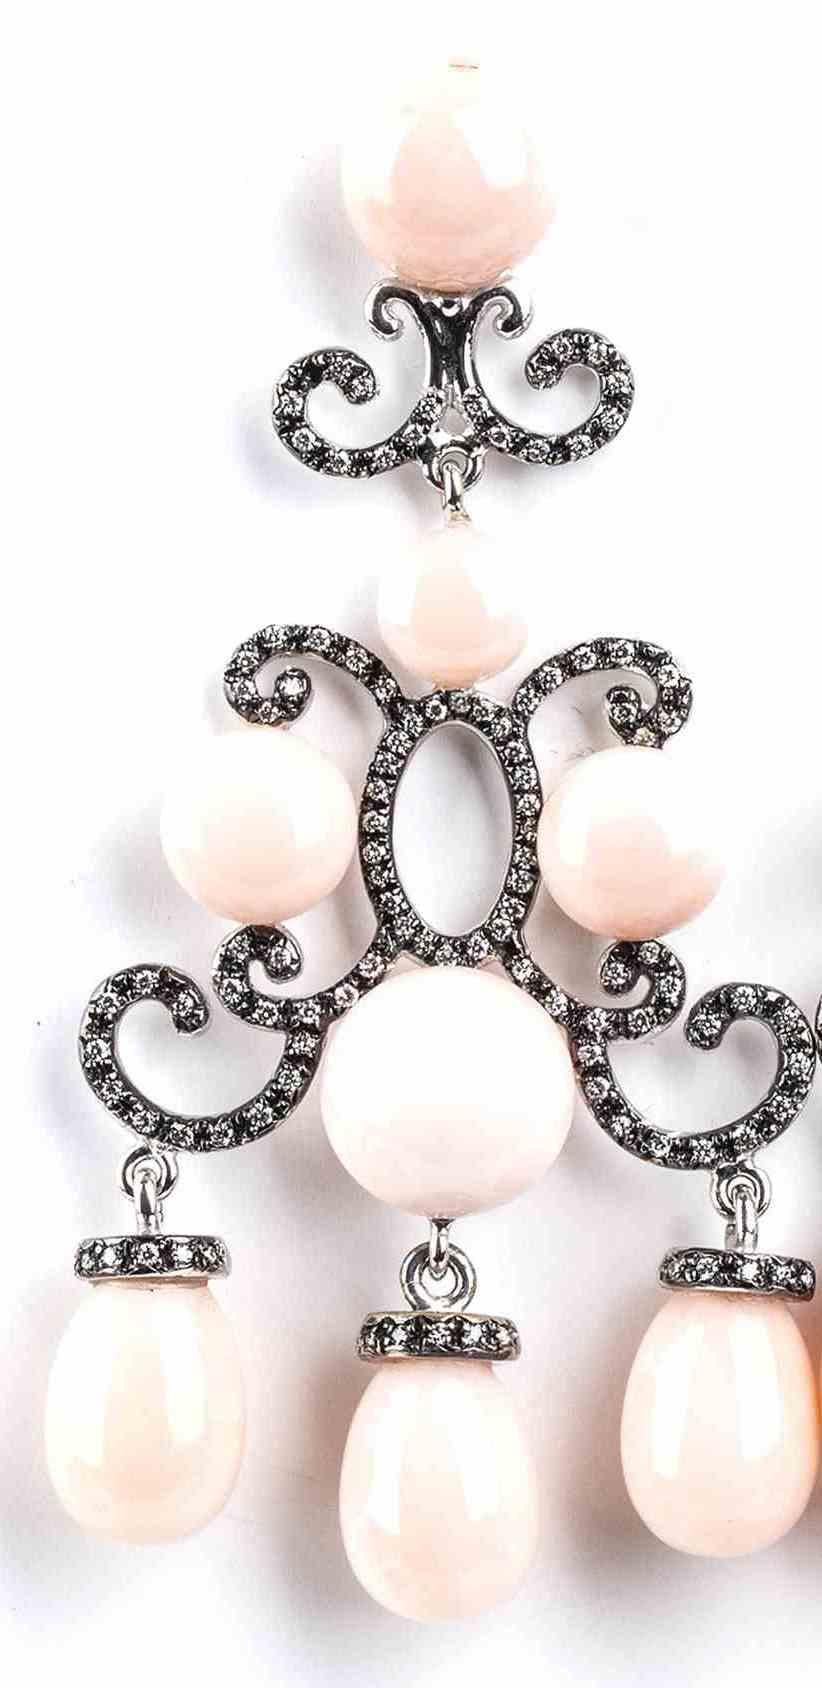 Brilliant Cut Gold, Pink Coral Chandelier Style and Diamonds Earrings